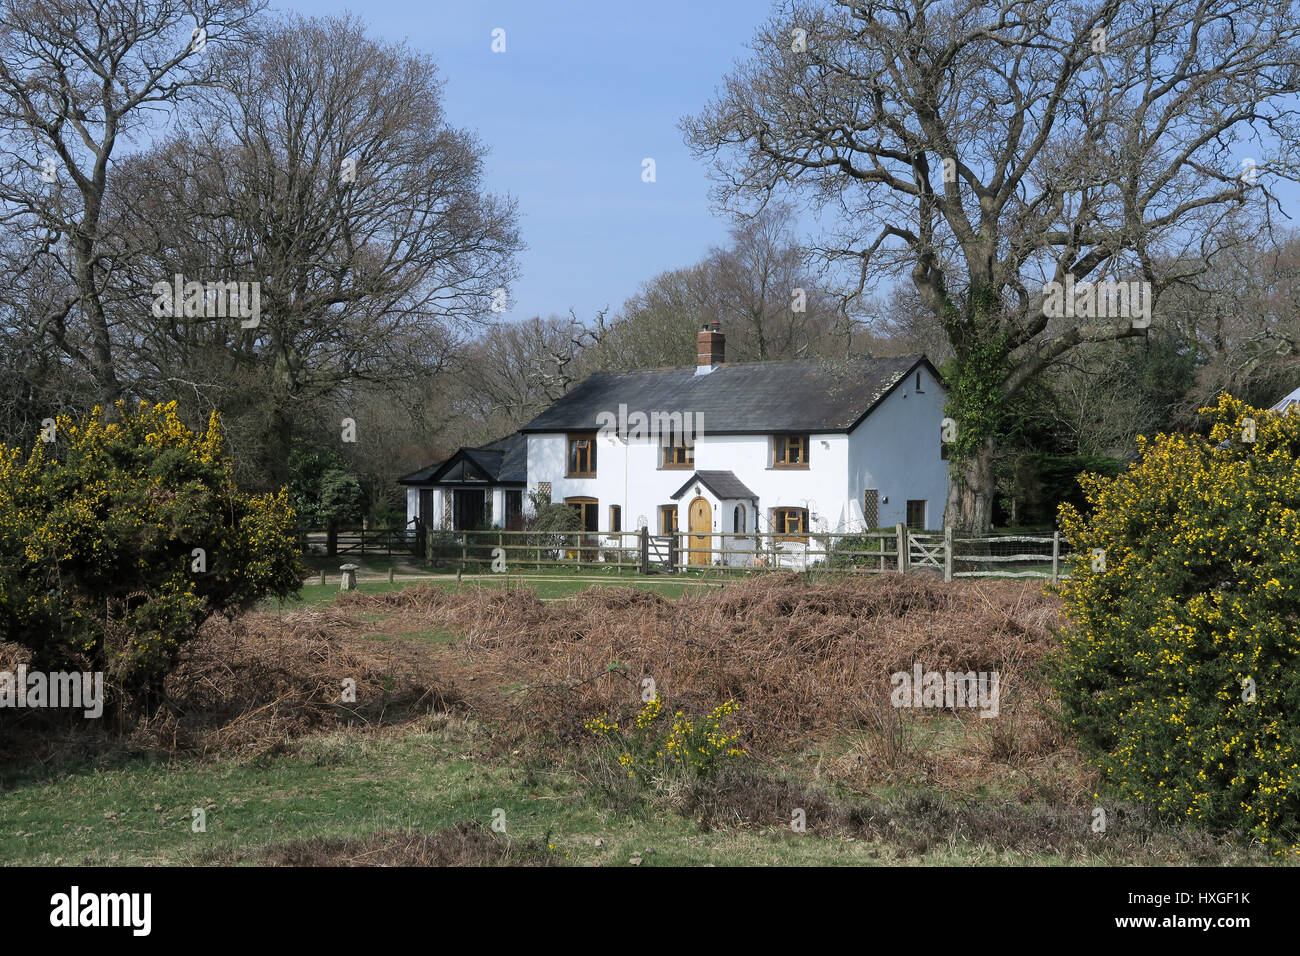 Quintessenza inglese New Forest cottage Foto Stock